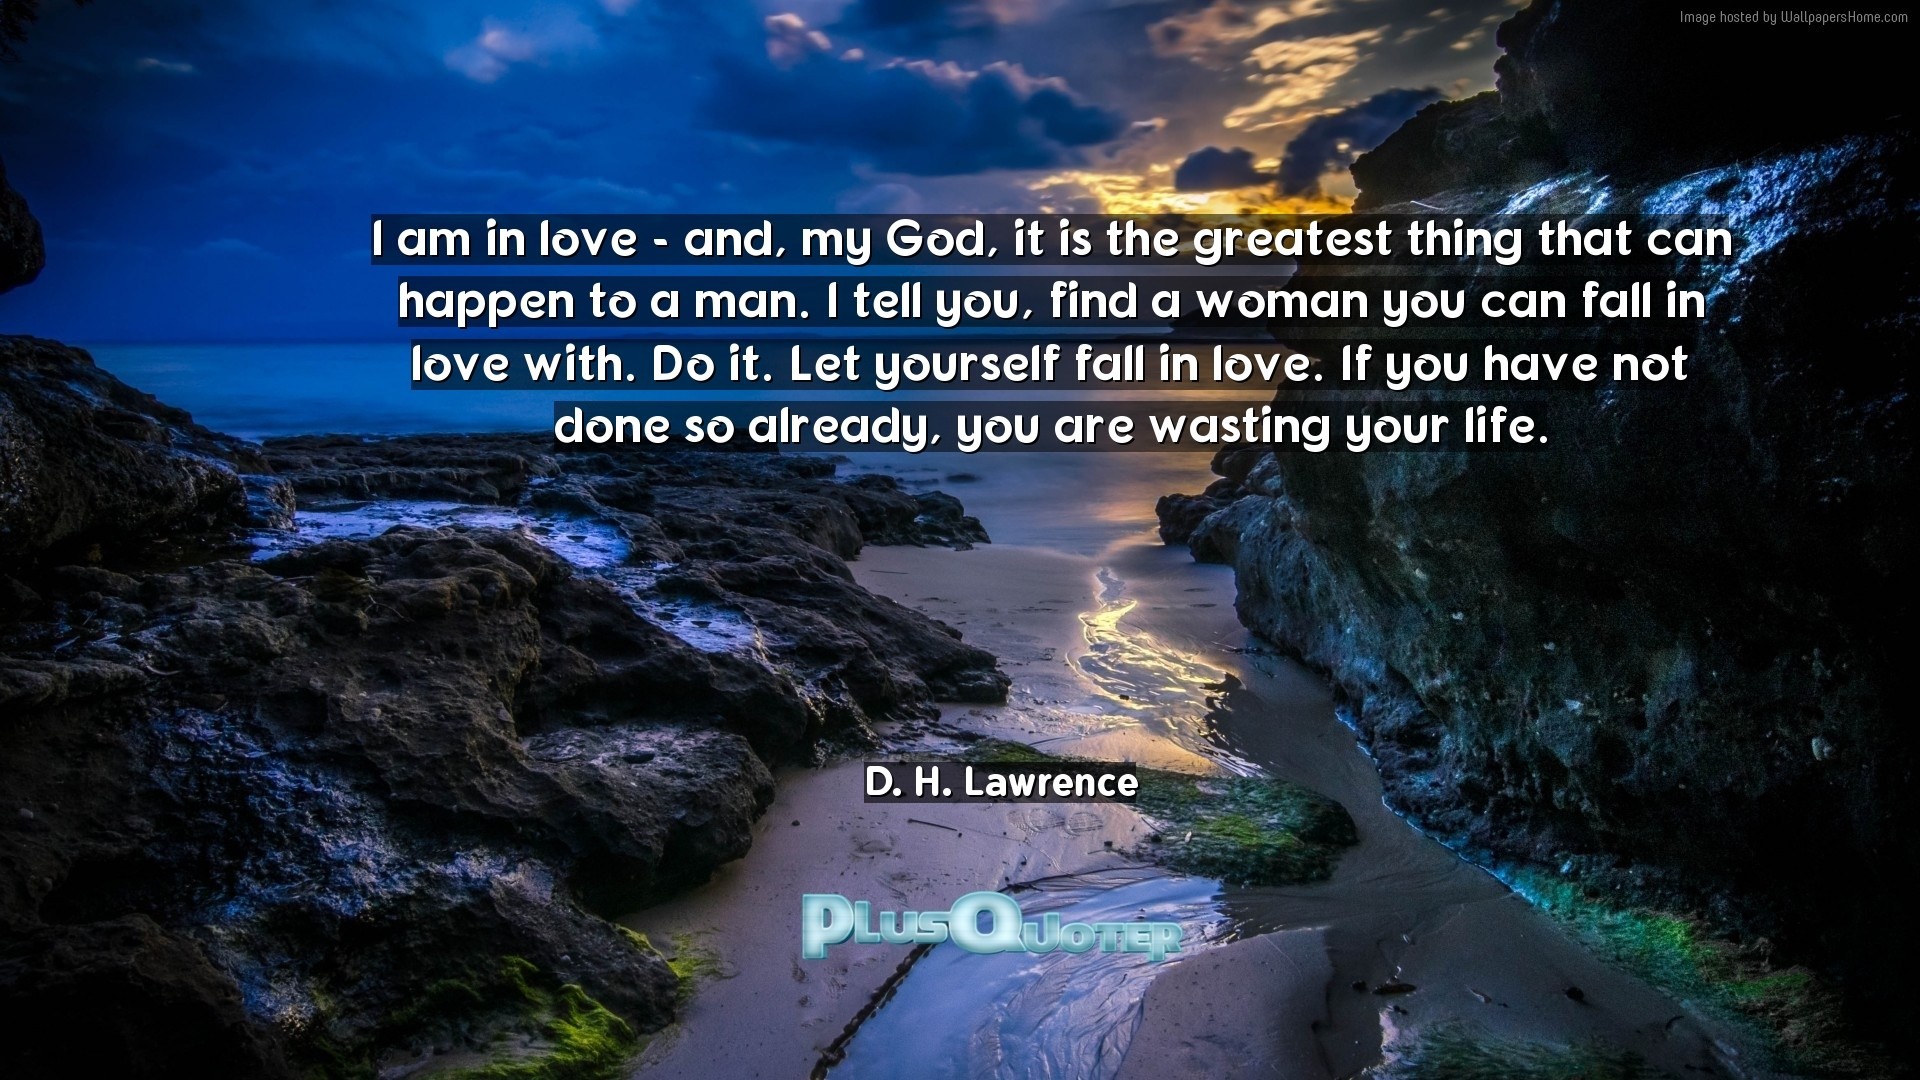 1920x1080 Download Wallpaper with inspirational Quotes- "I am in love - and, my God